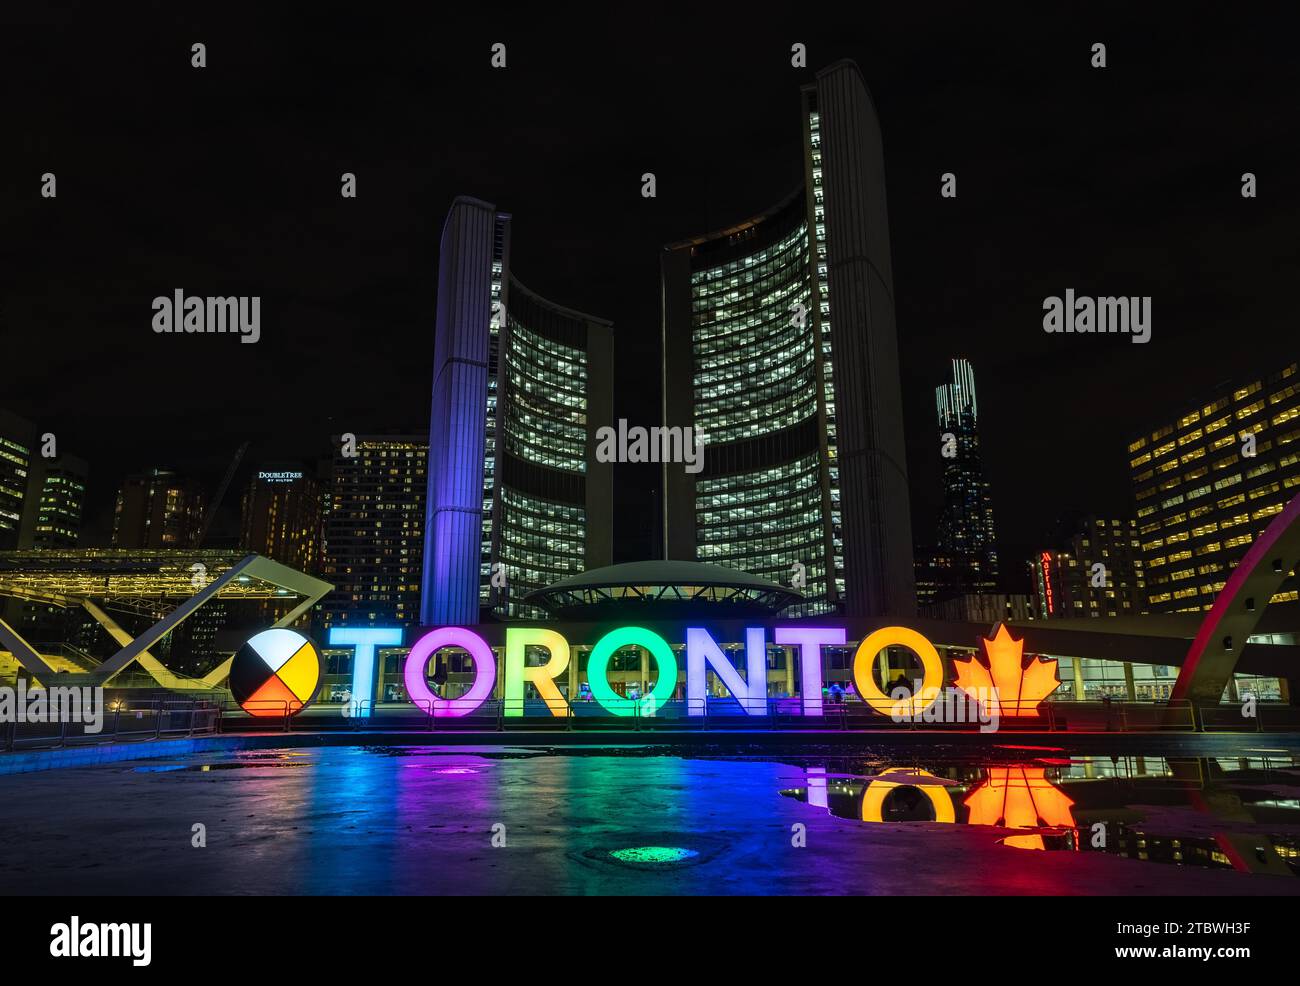 A picture of the Toronto Sign at night Stock Photo